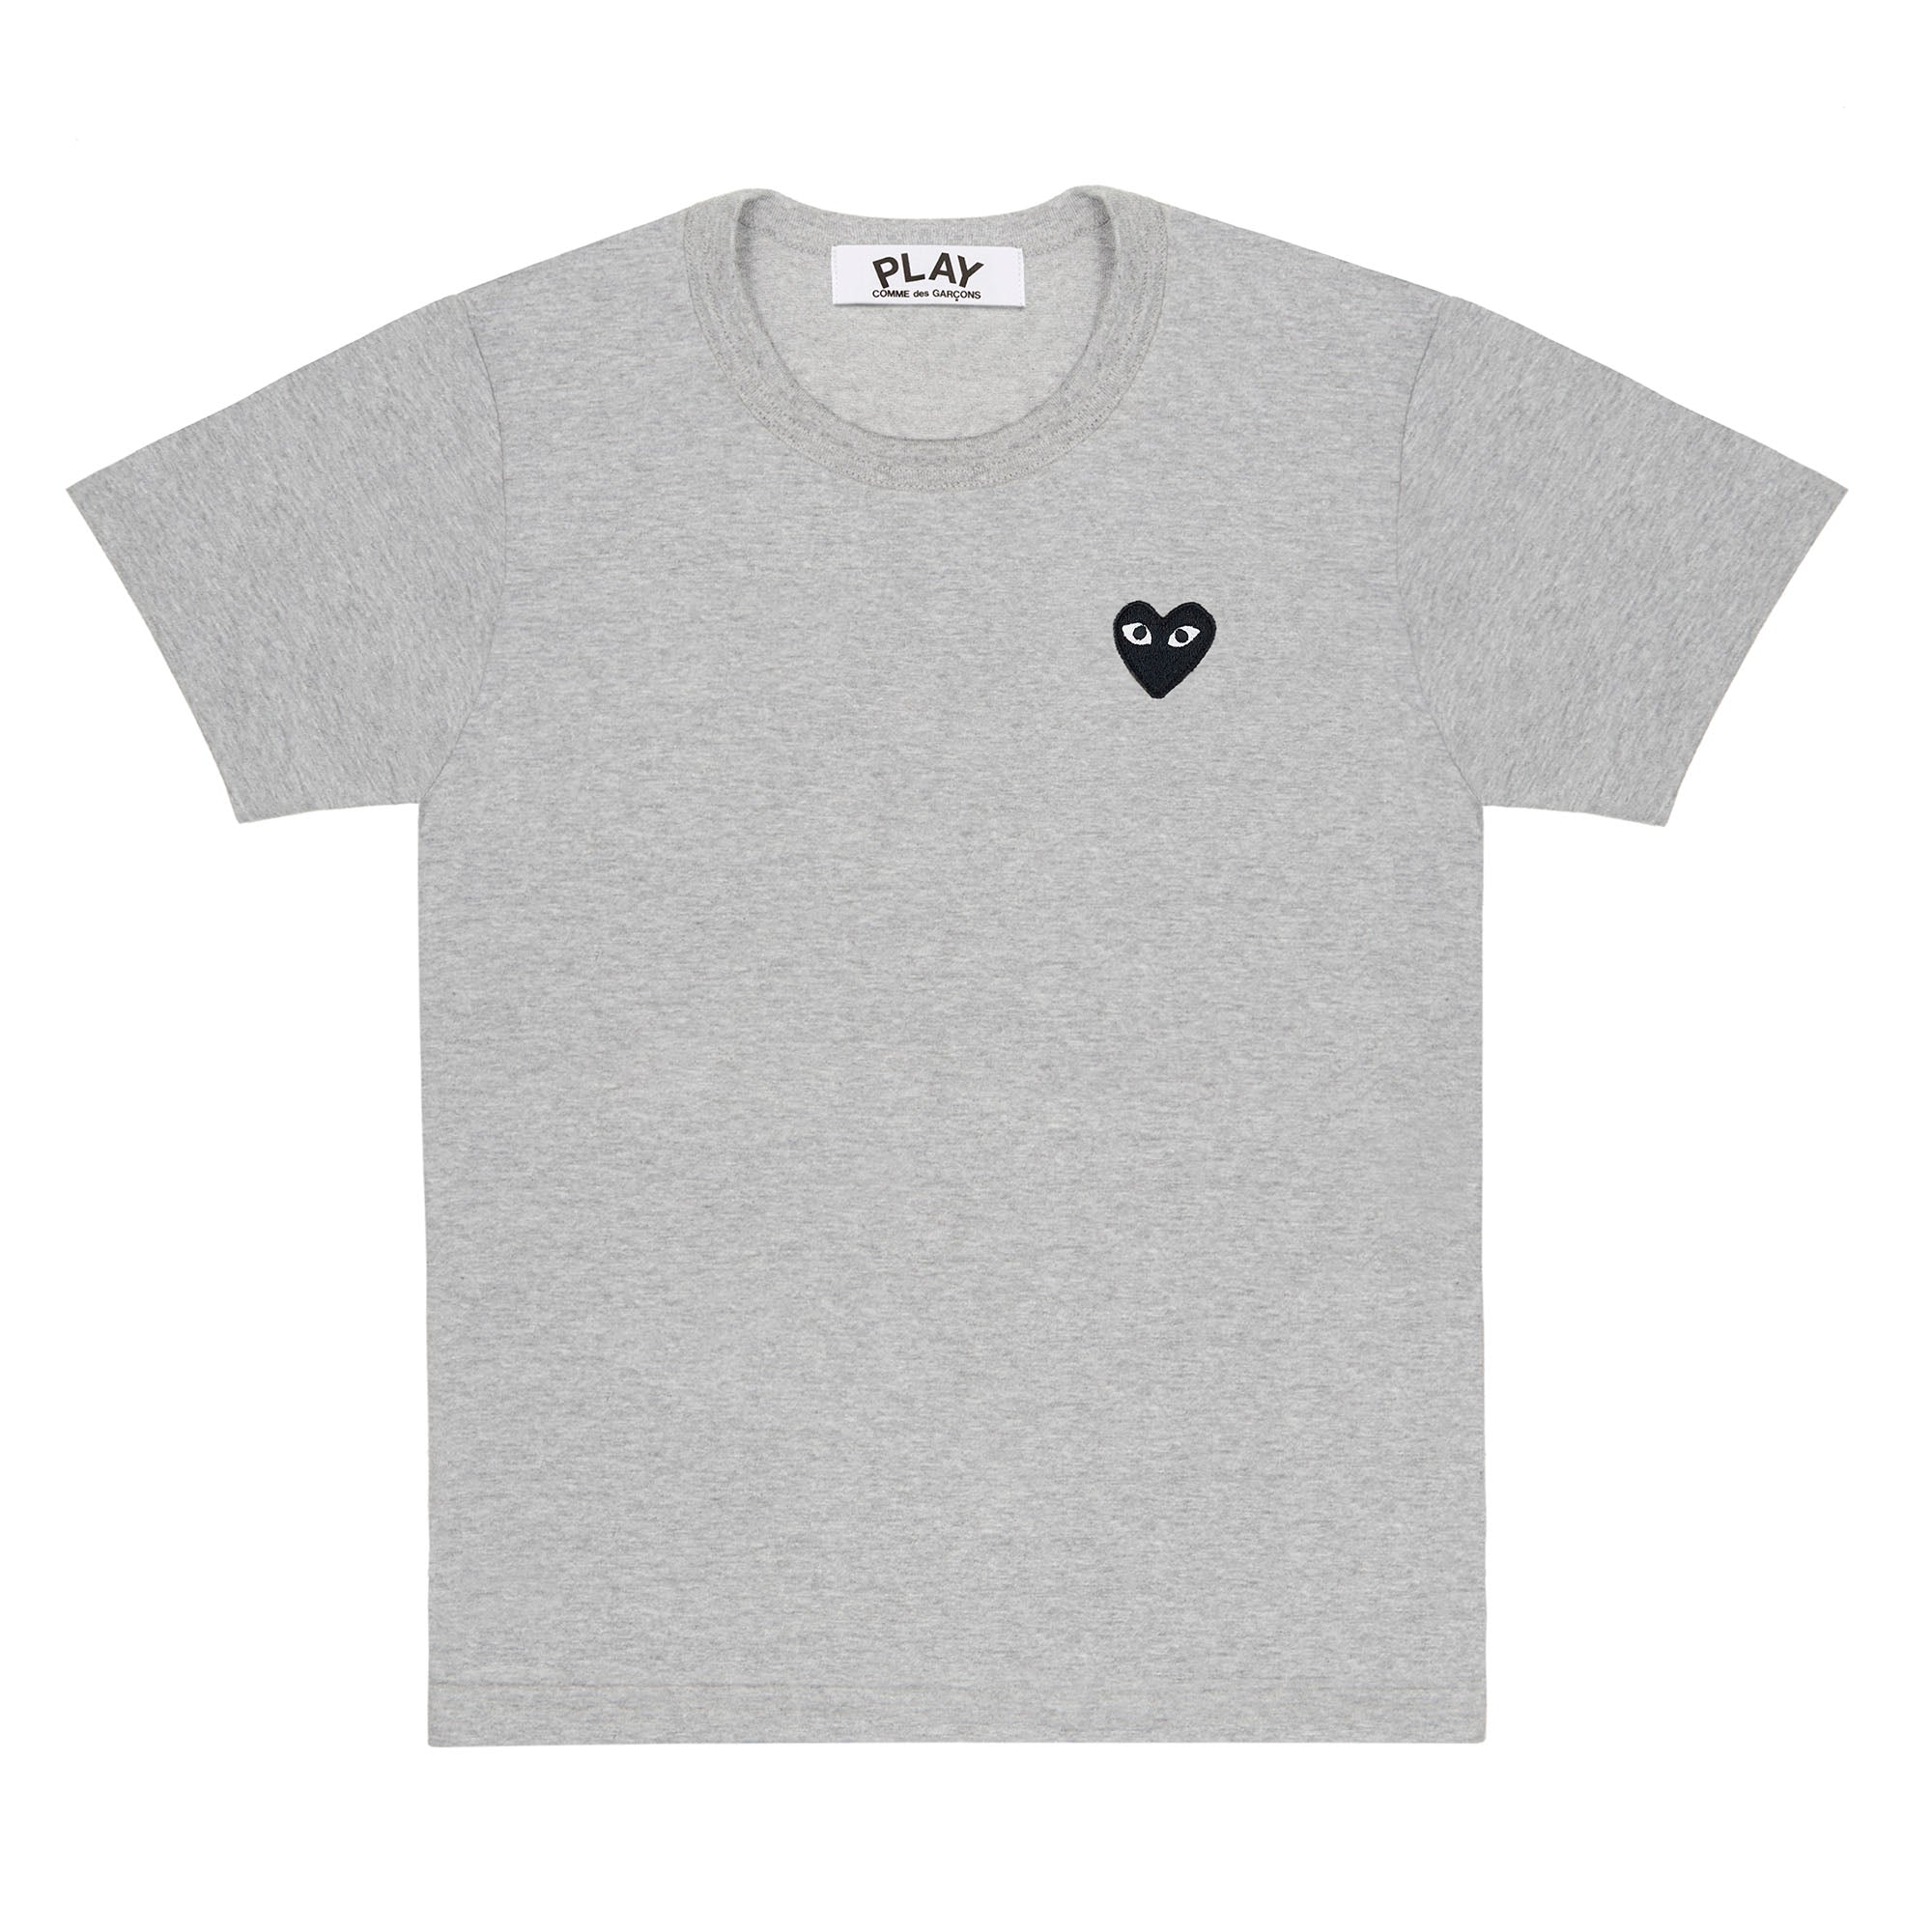 PLAY CDG - TOP DYED COTTON JERSEY WITH BLACK EMBLEM - (TOP DYED GREY)